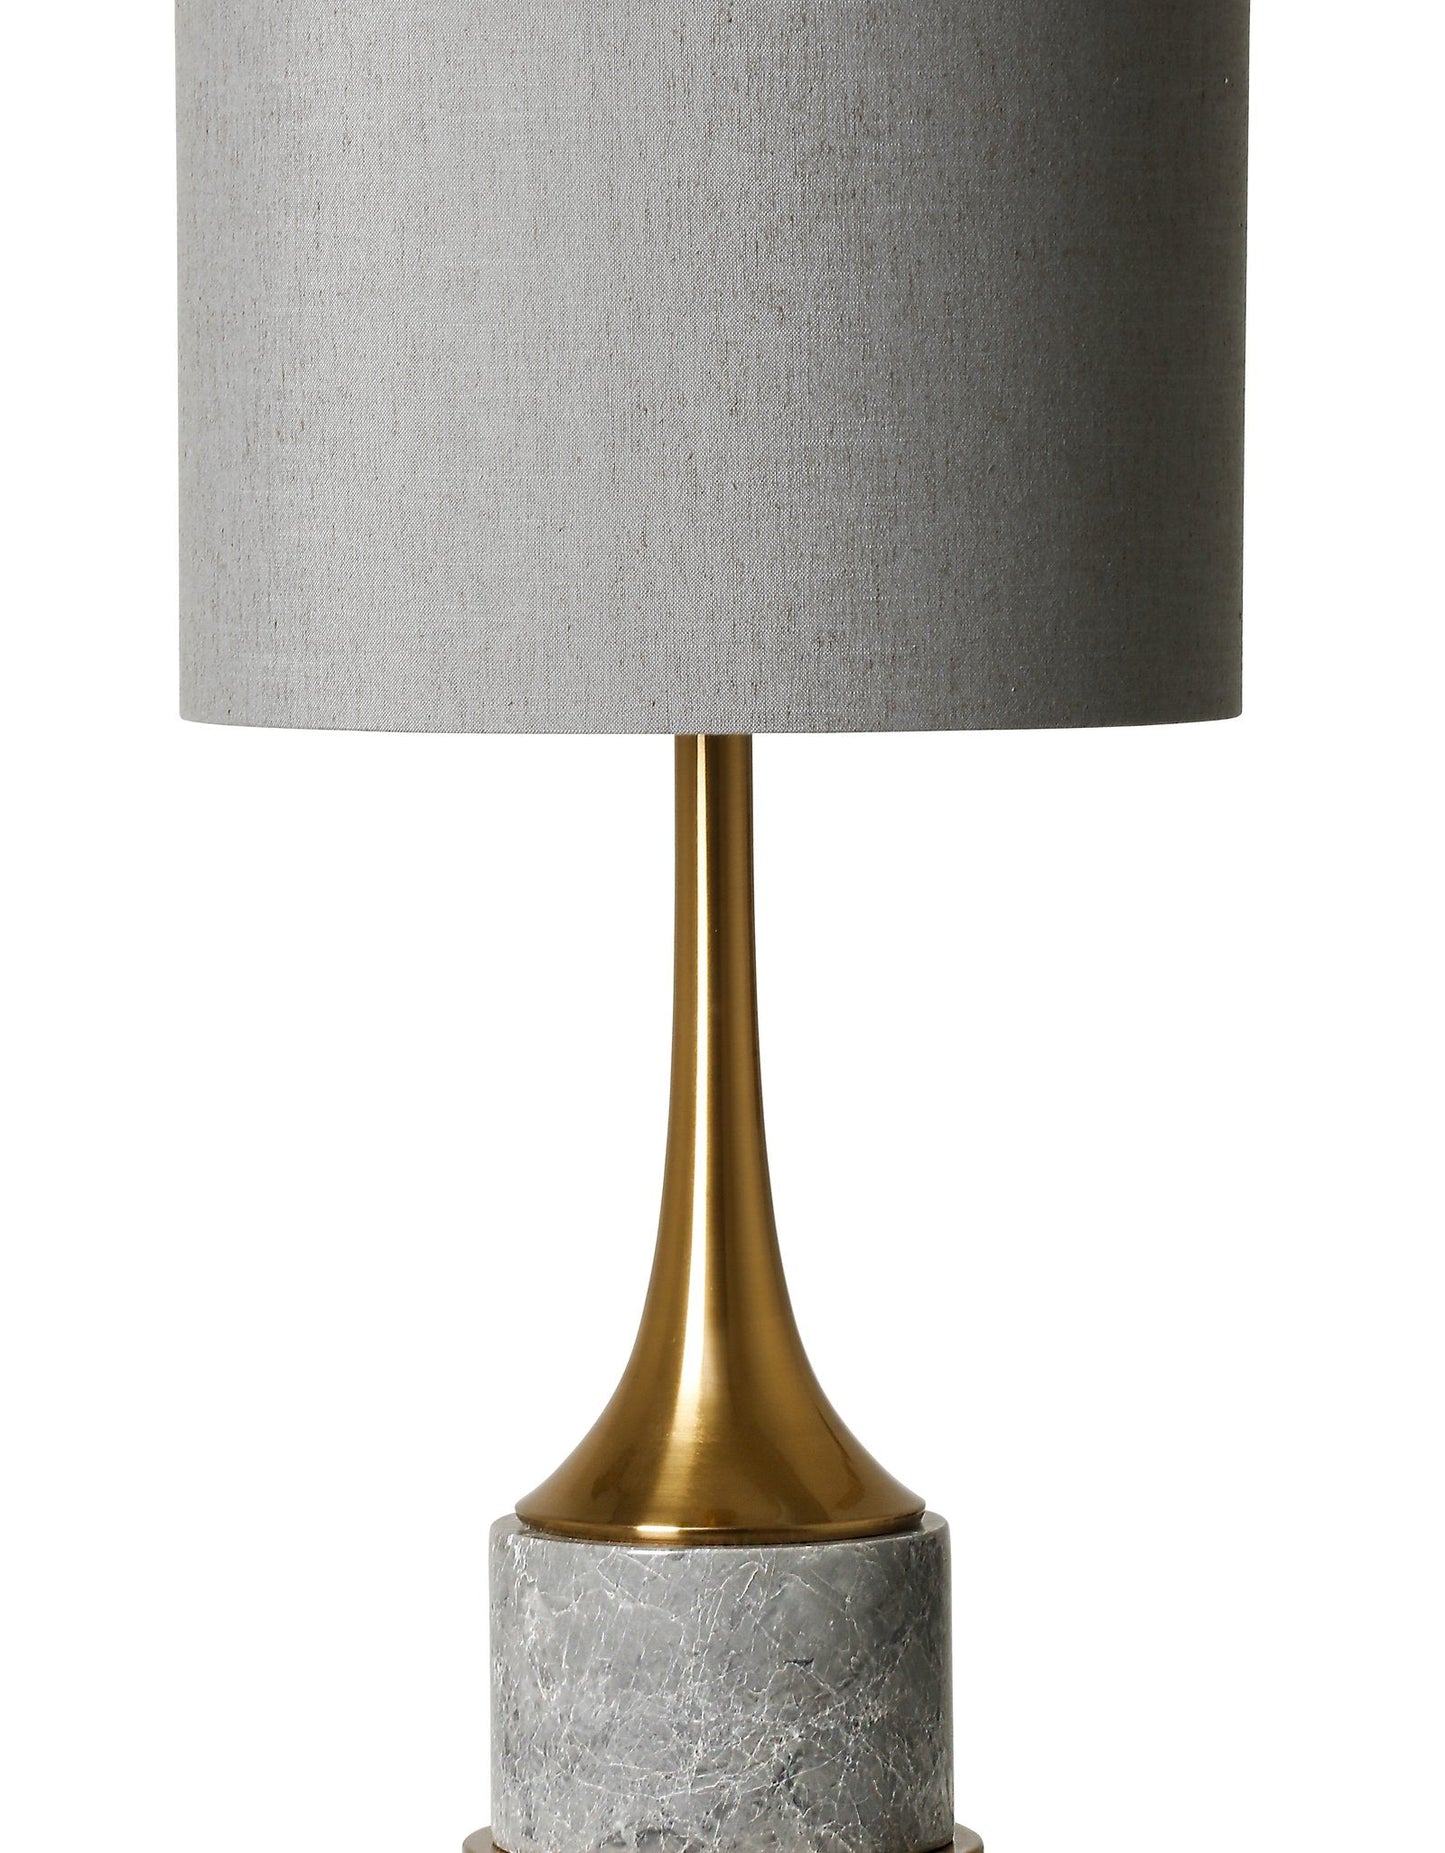 Garwin  table lamp SALE View and Purchase instore